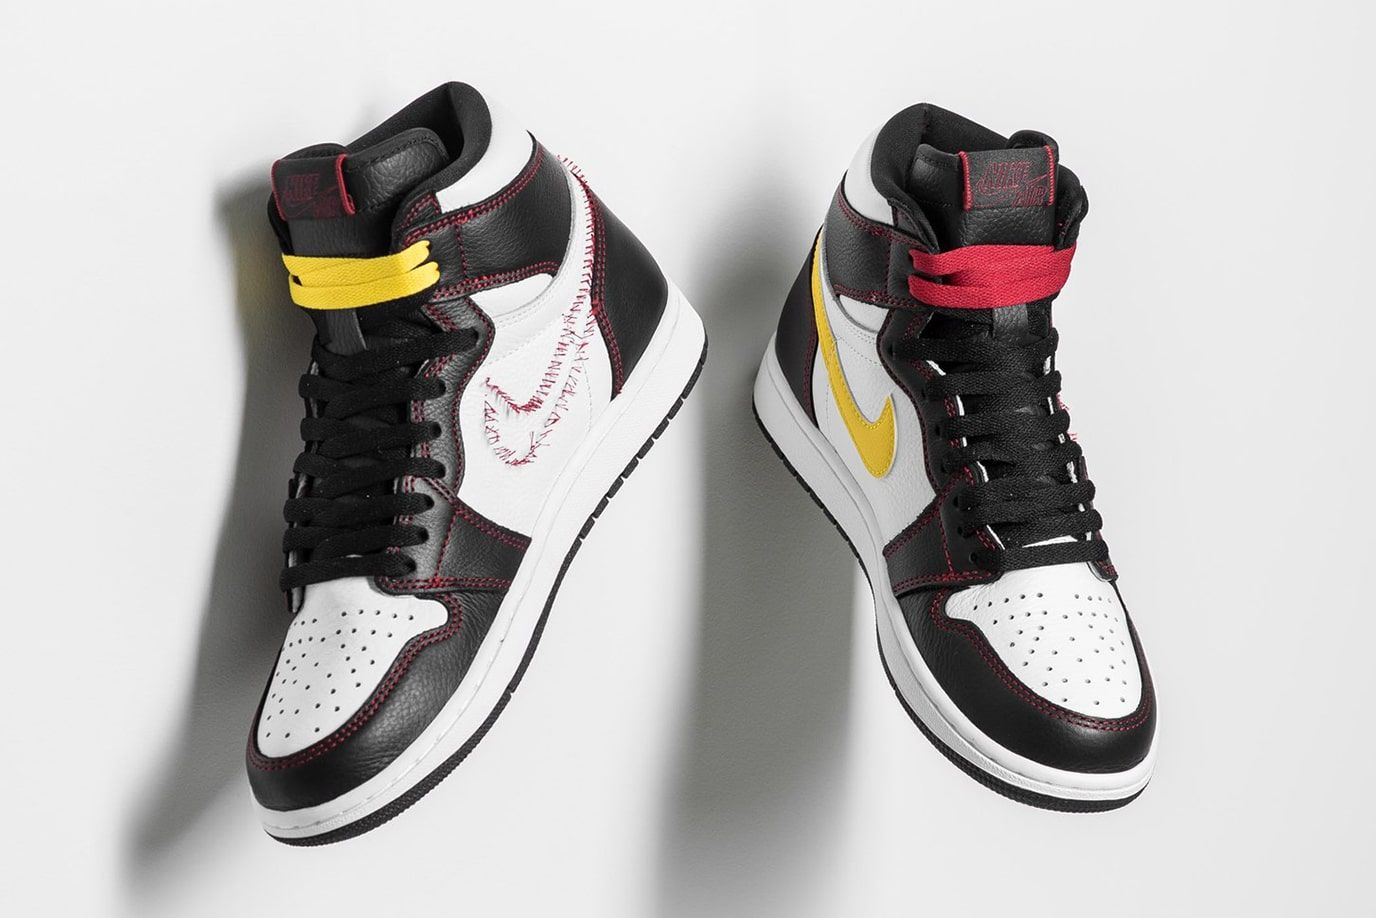 The Air Jordan 1 Defiant “Tour Yellow” Drops on July 27th | House